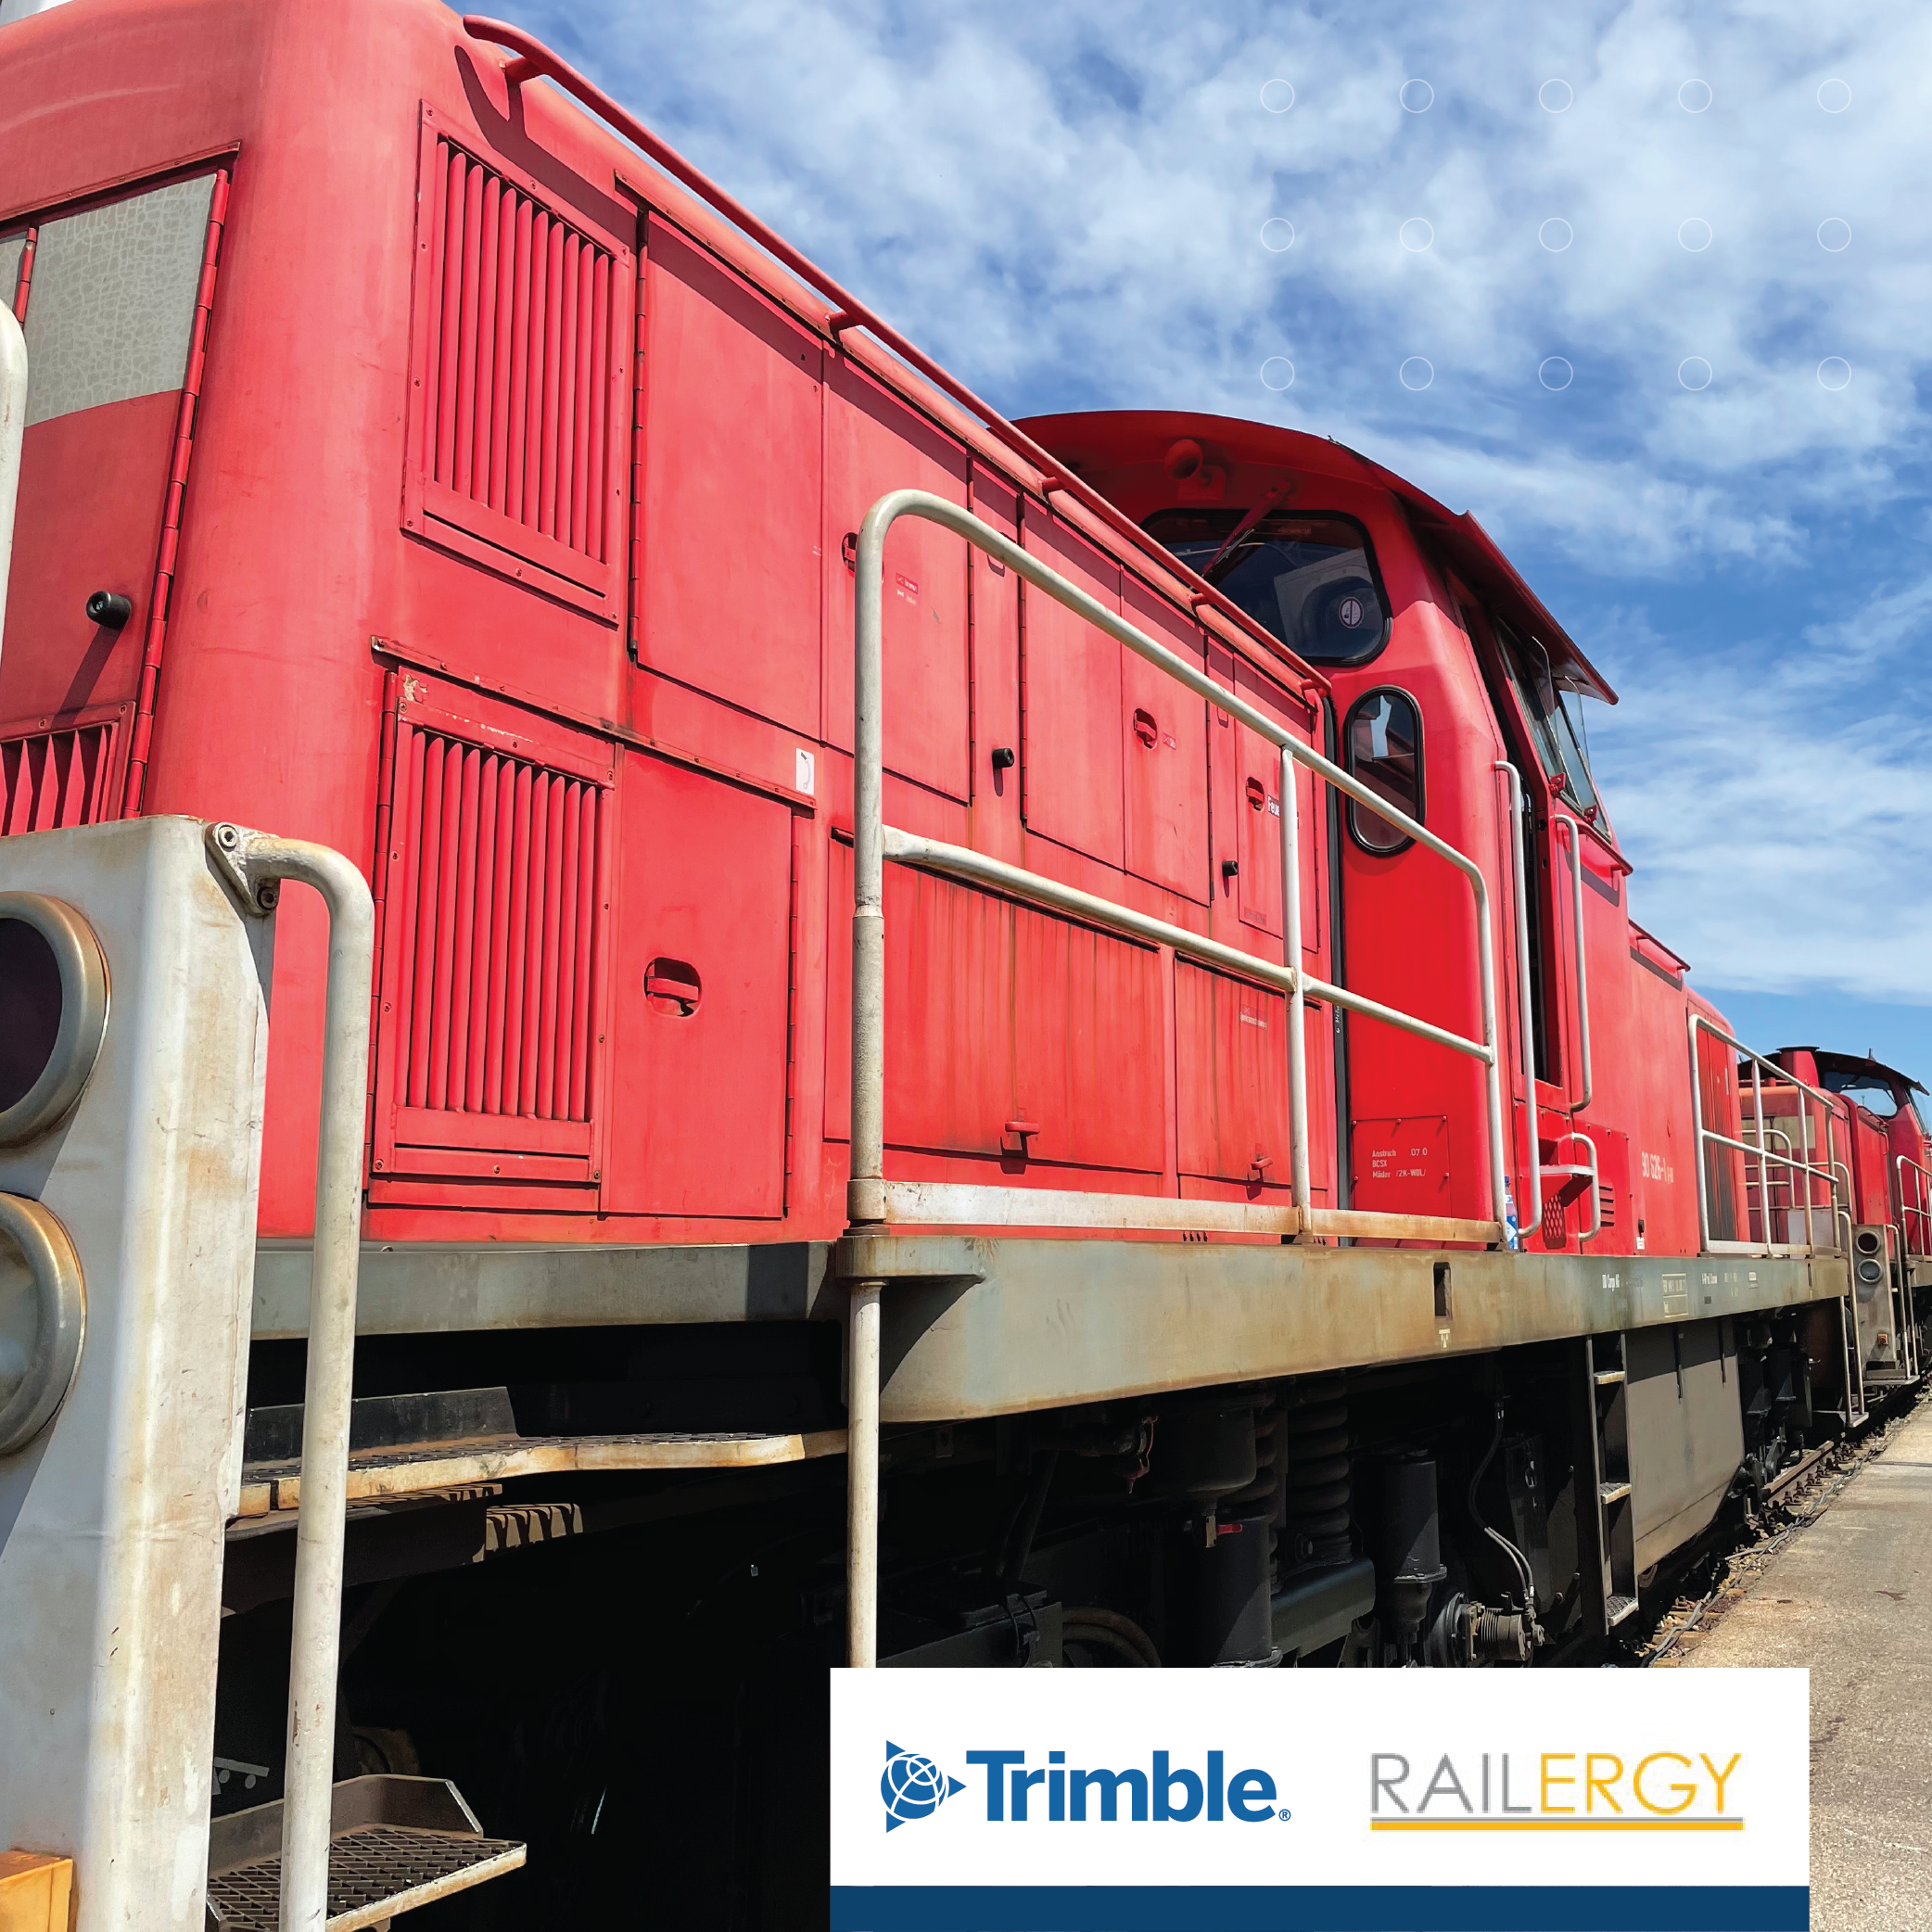 Picture of a red VAL train with the Trimble and Railergy logos in the top banner